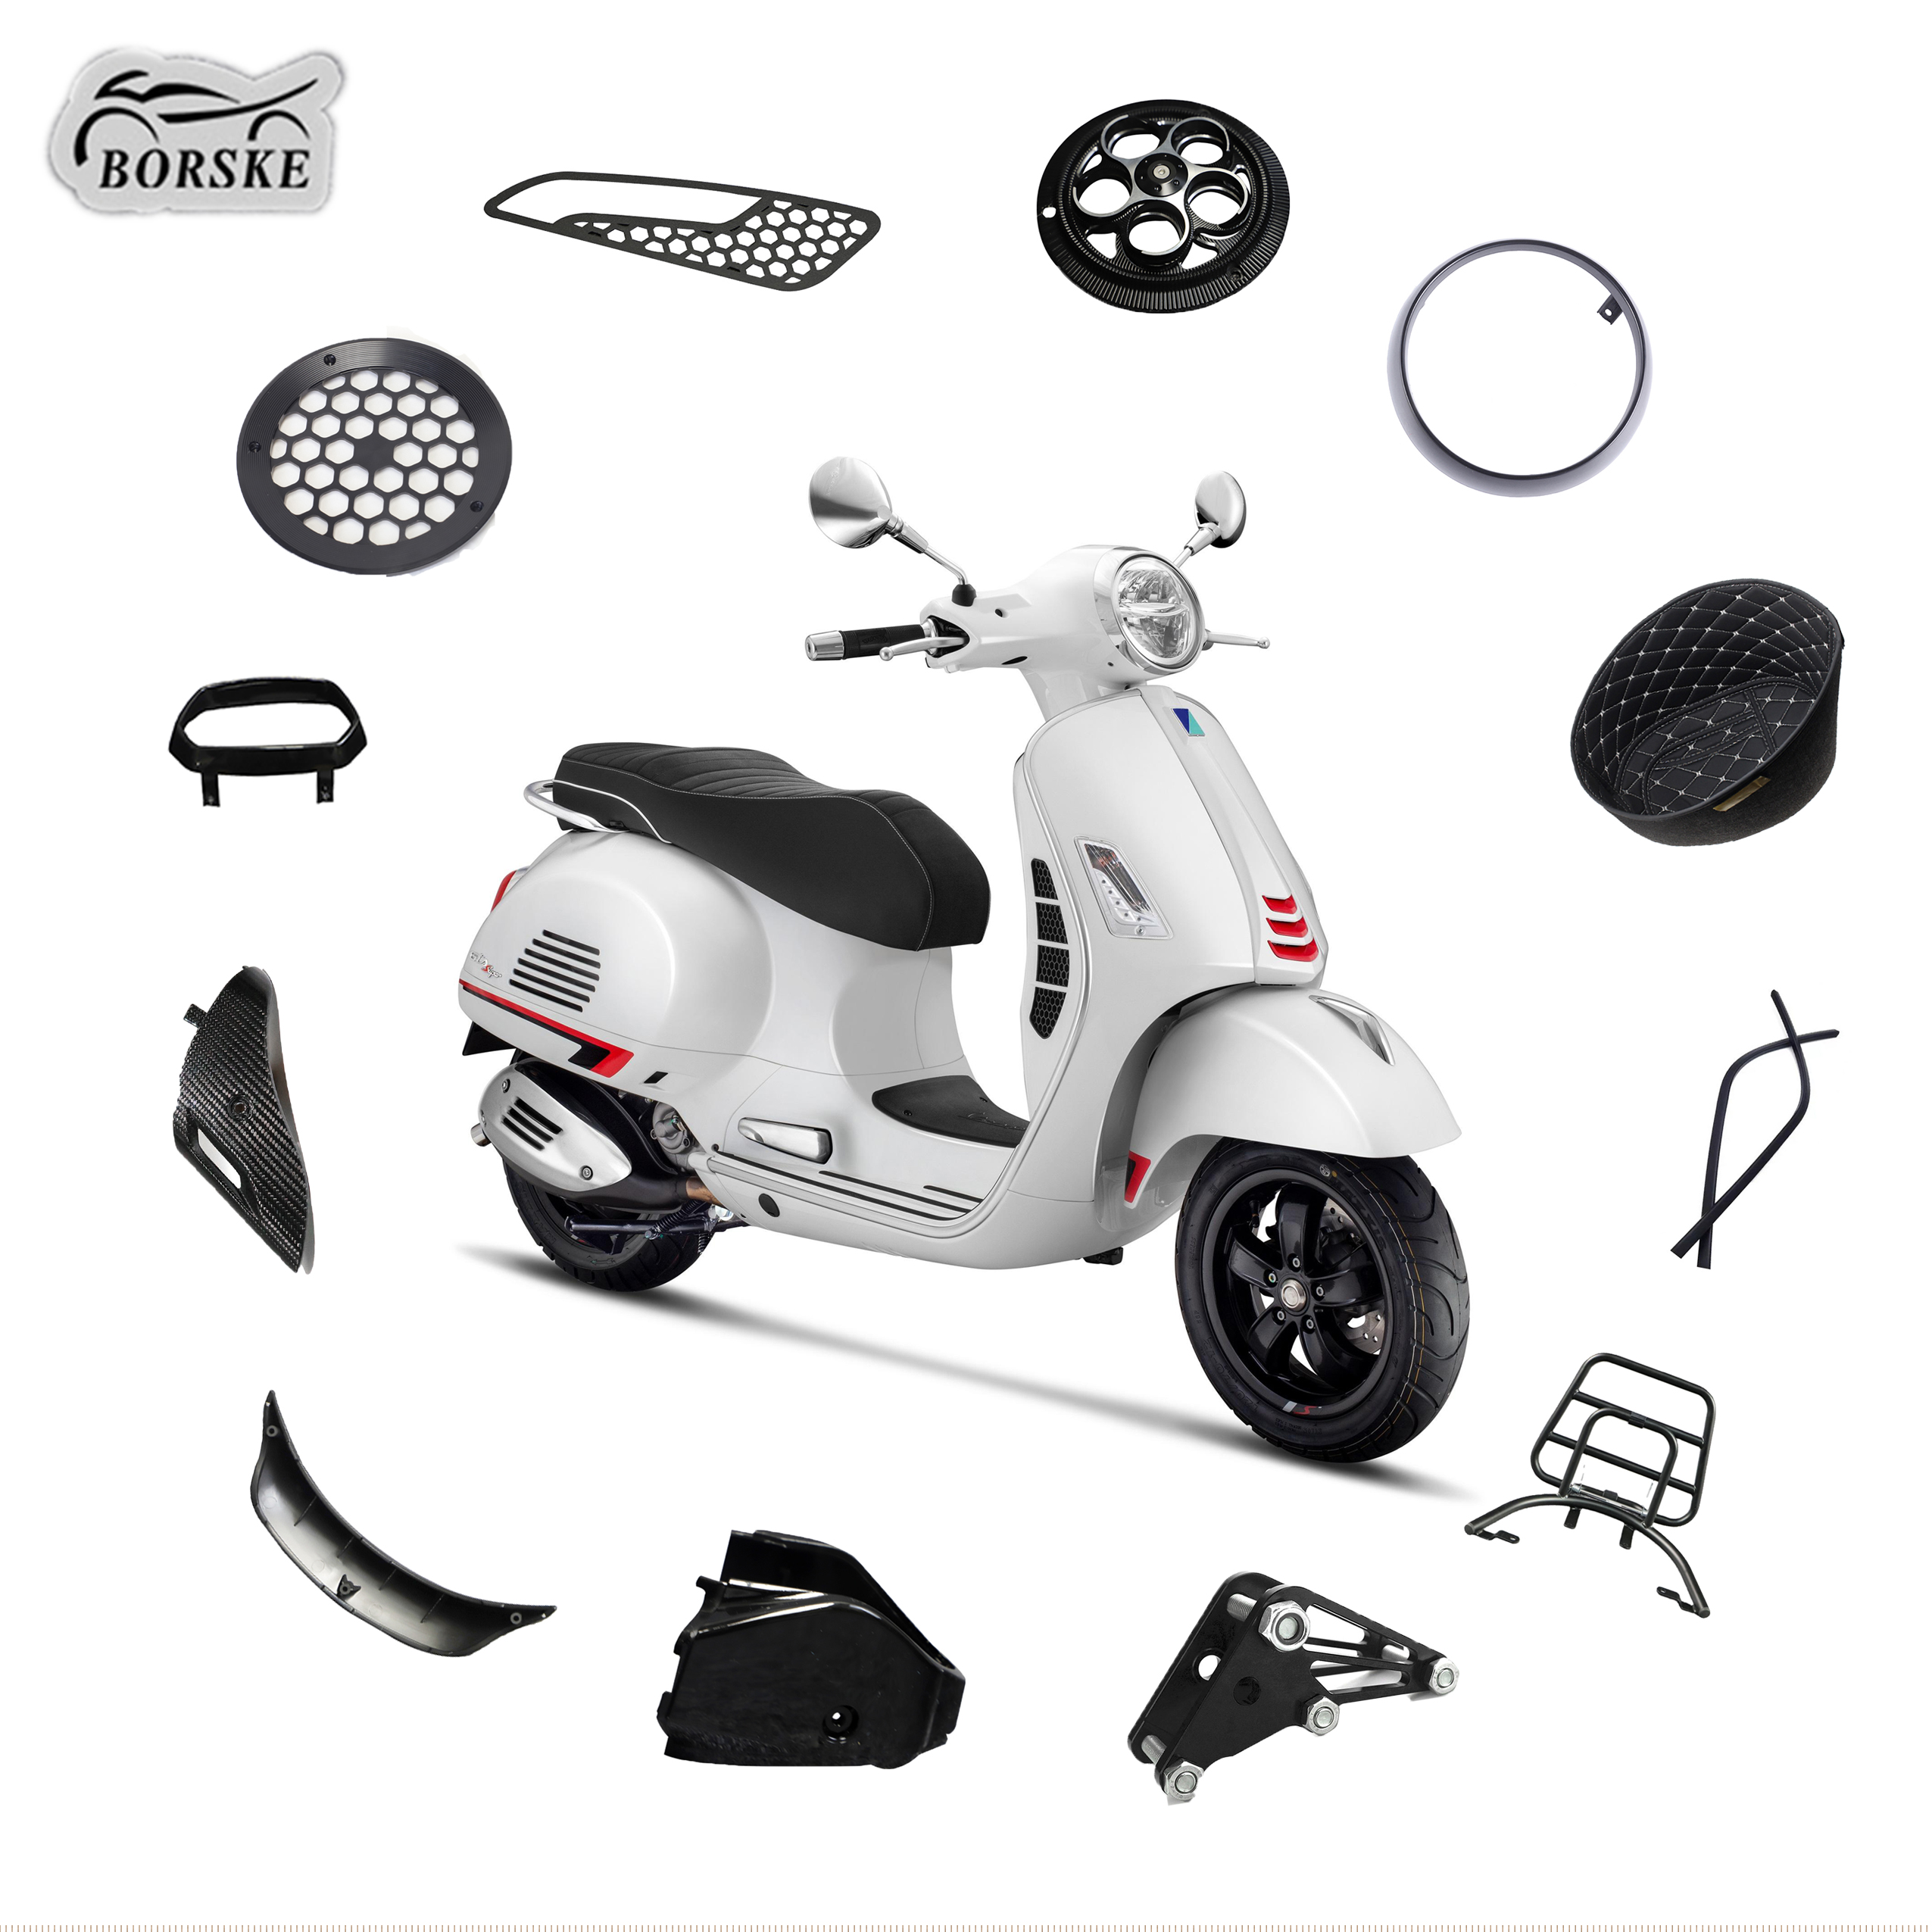 What are the best selling vespa scooter parts in European countries?